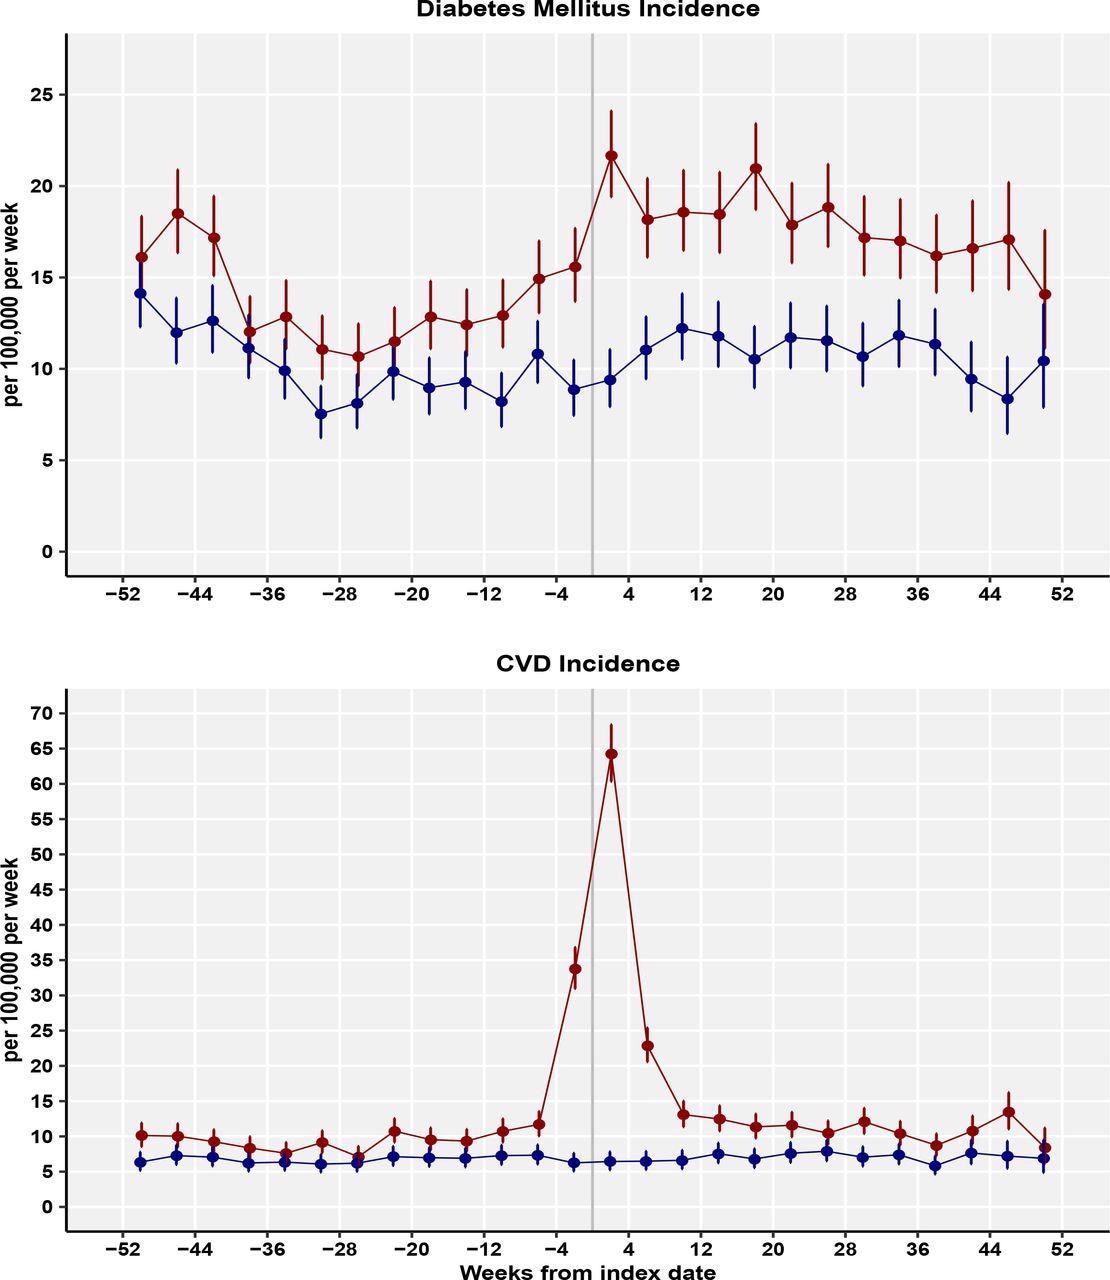 Incidence rates for diabetes mellitus and cardiovascular diseases (per 100,000 patient weeks) for Covid-19 patients and controls for 4-week periods.